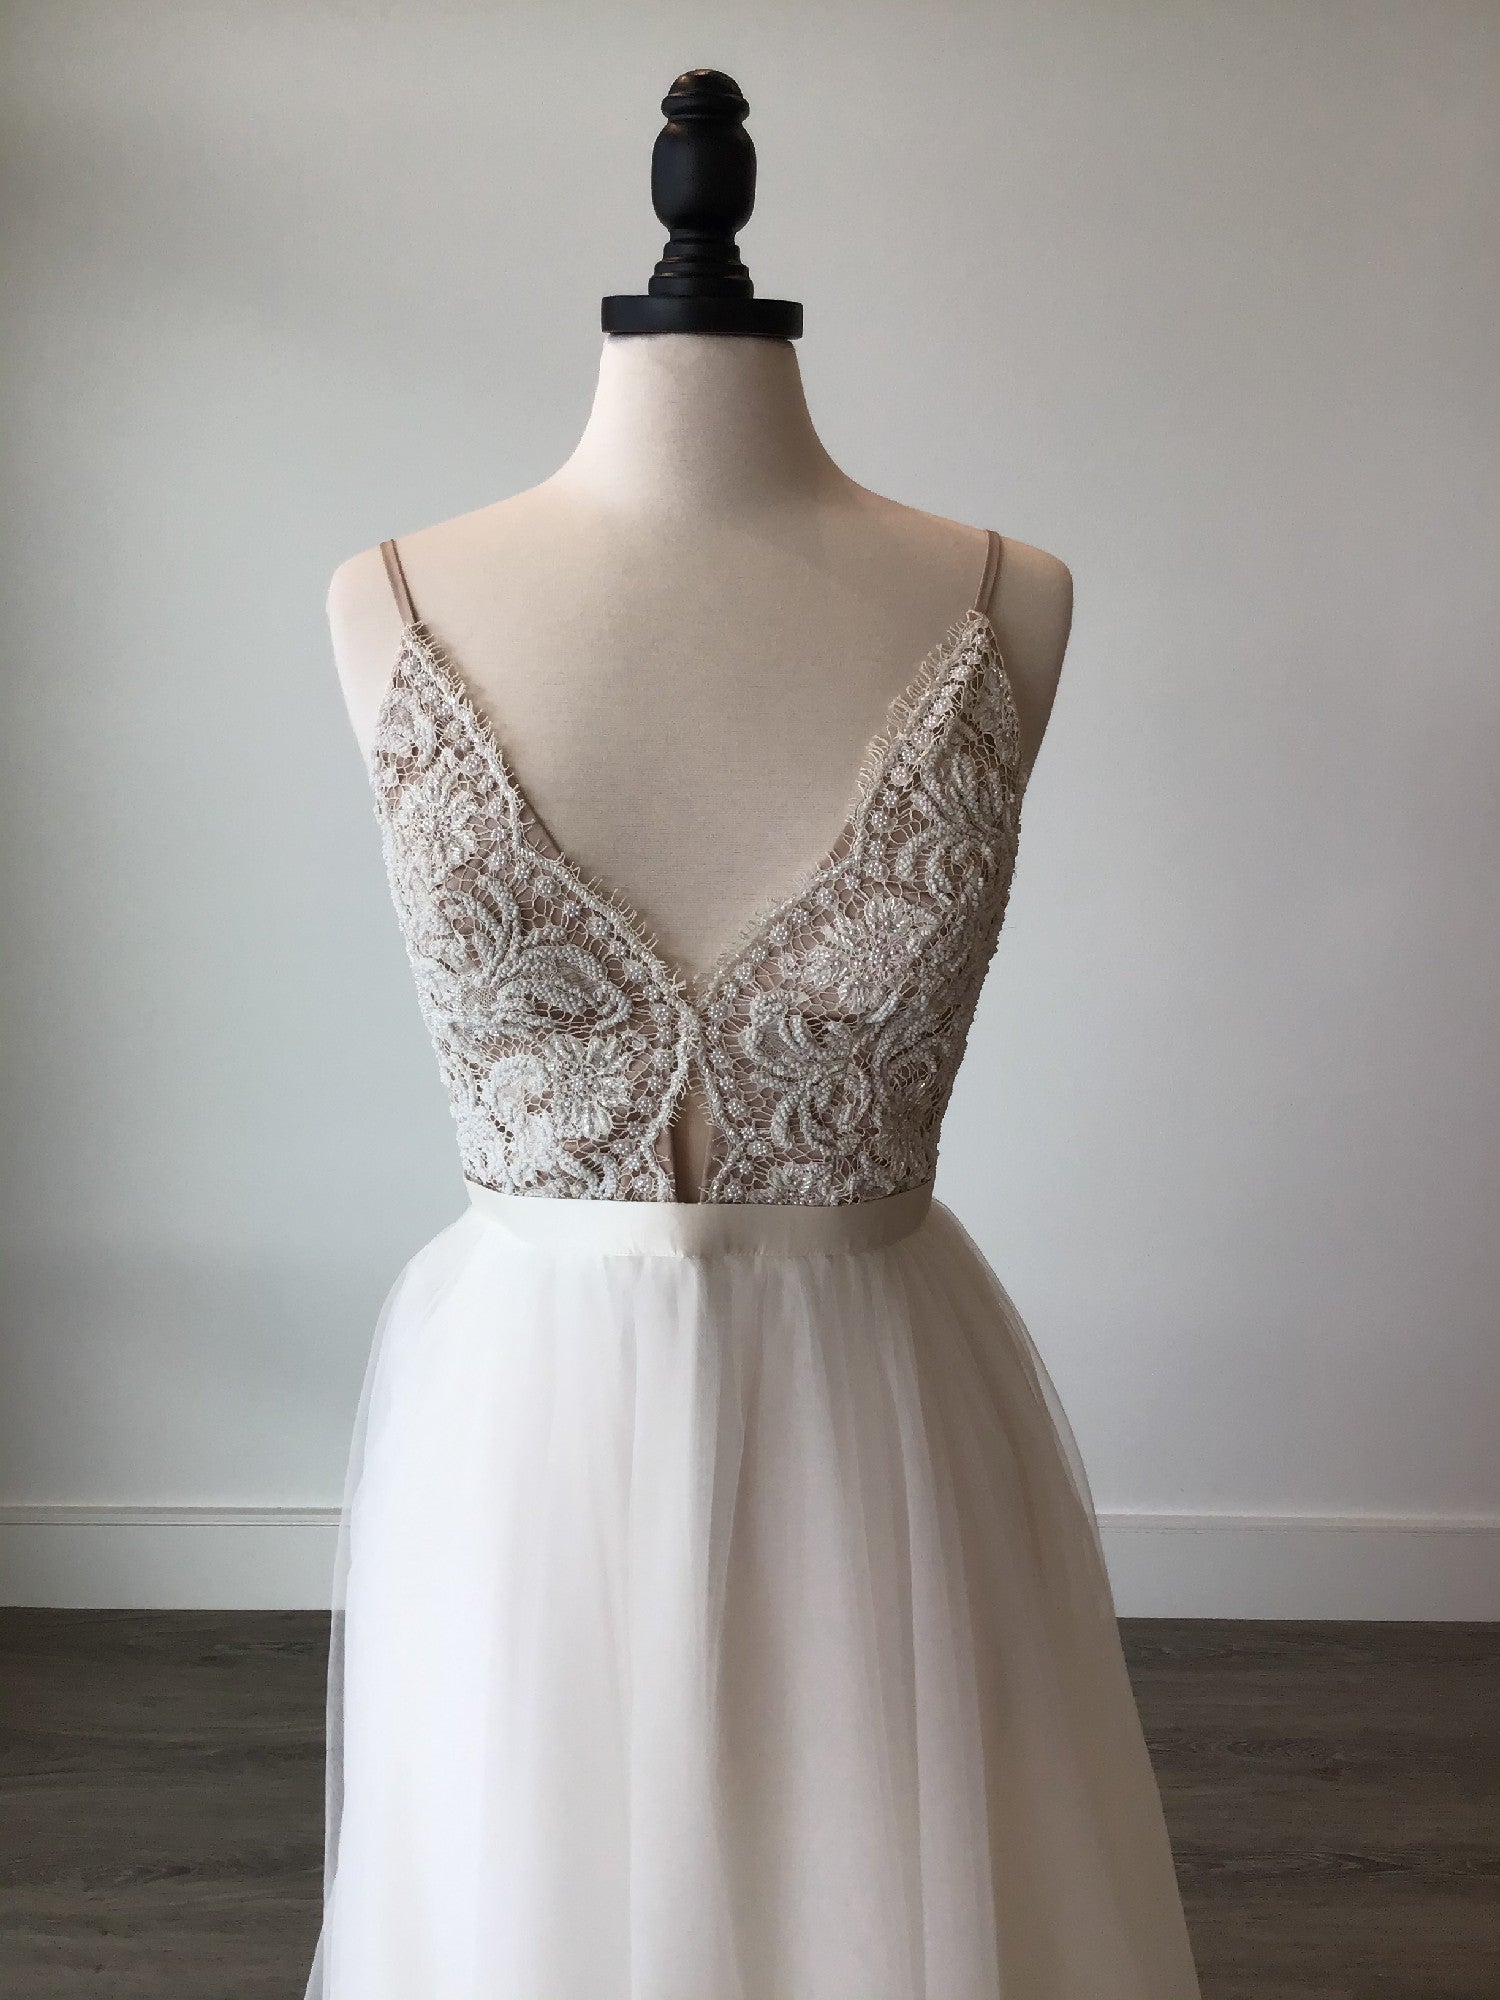 Truvelle Sara Gown